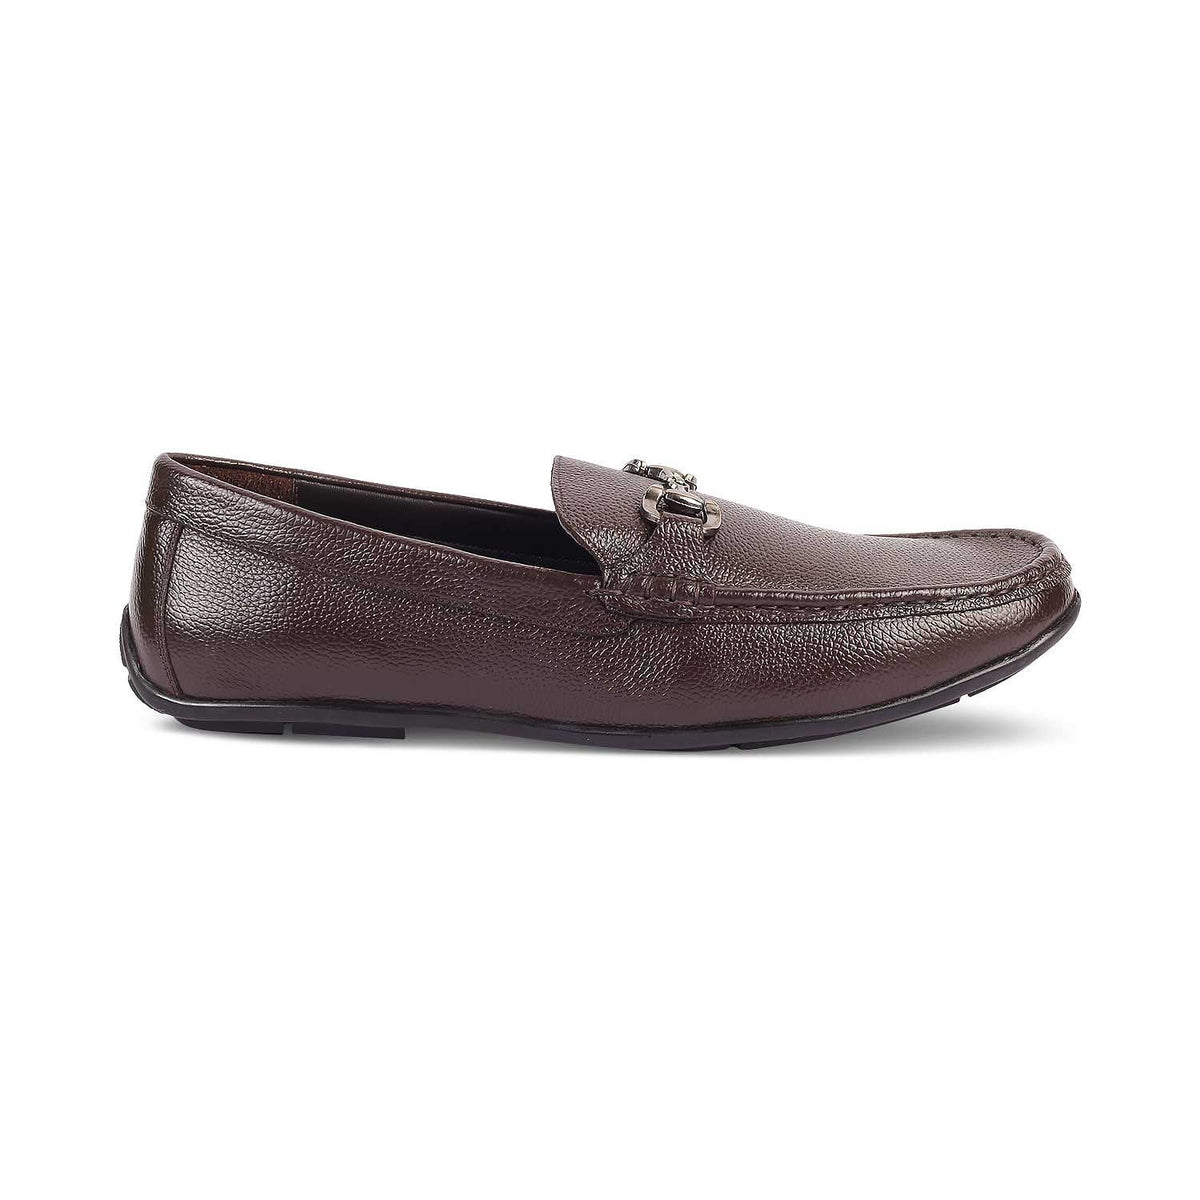 The Rosee Brown Men's Leather Driving Loafers Tresmode